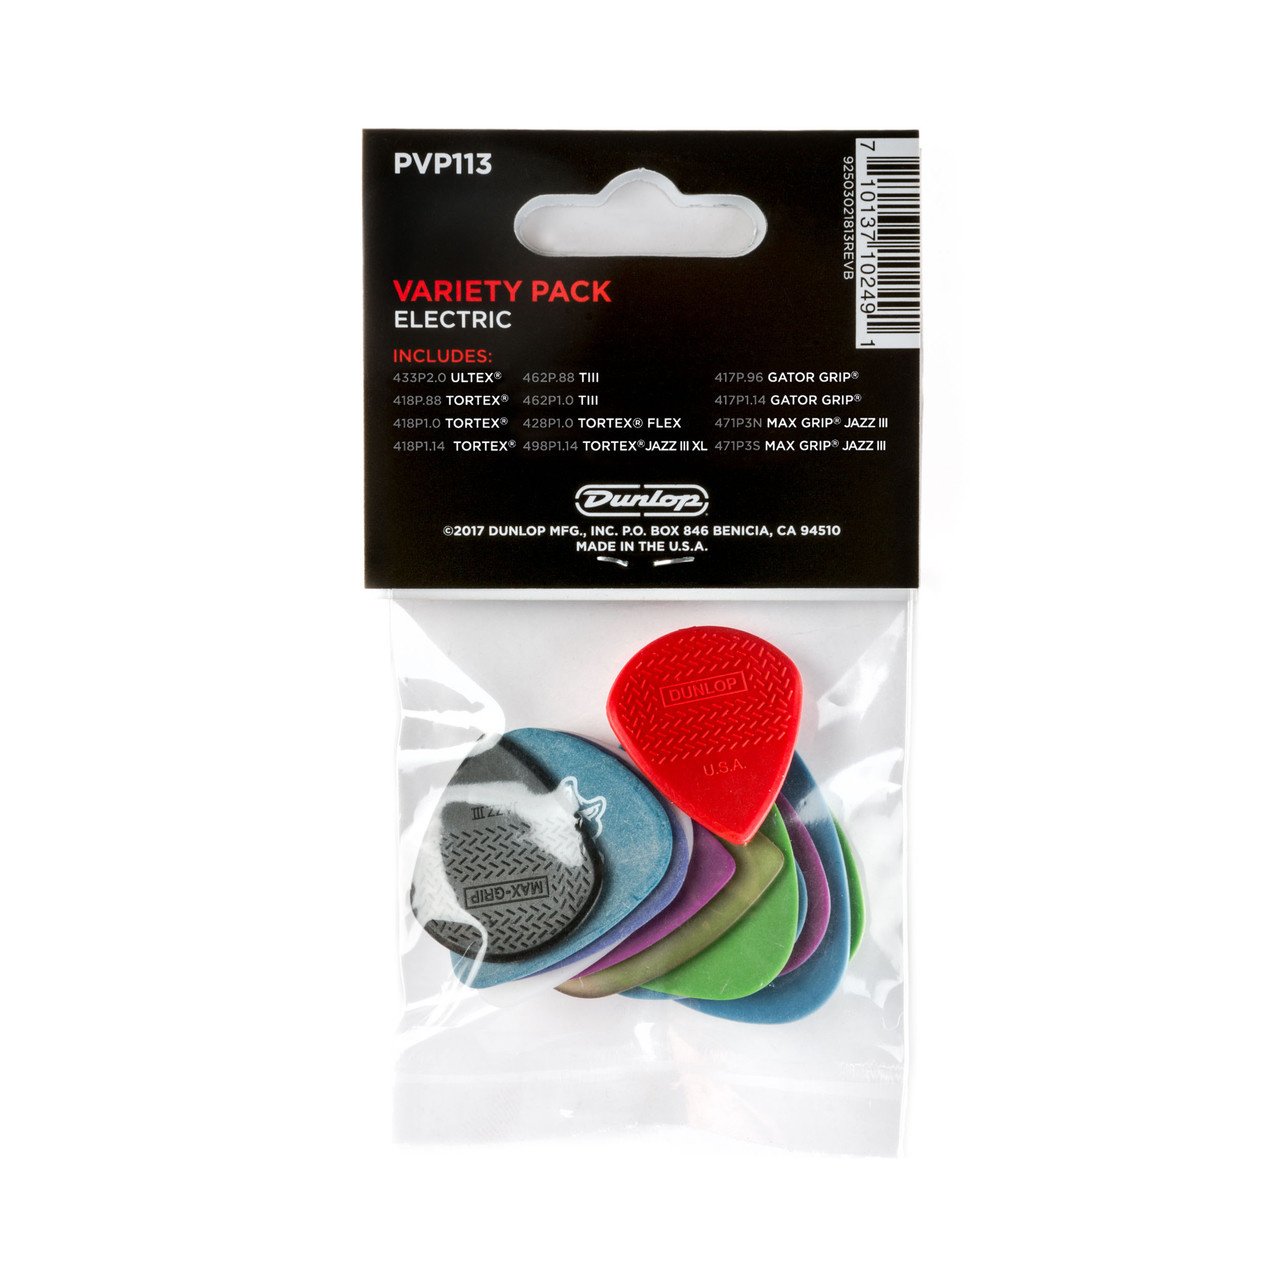 Dunlop Electric Pick Variety Pack (12-Picks) - Try some new tones!